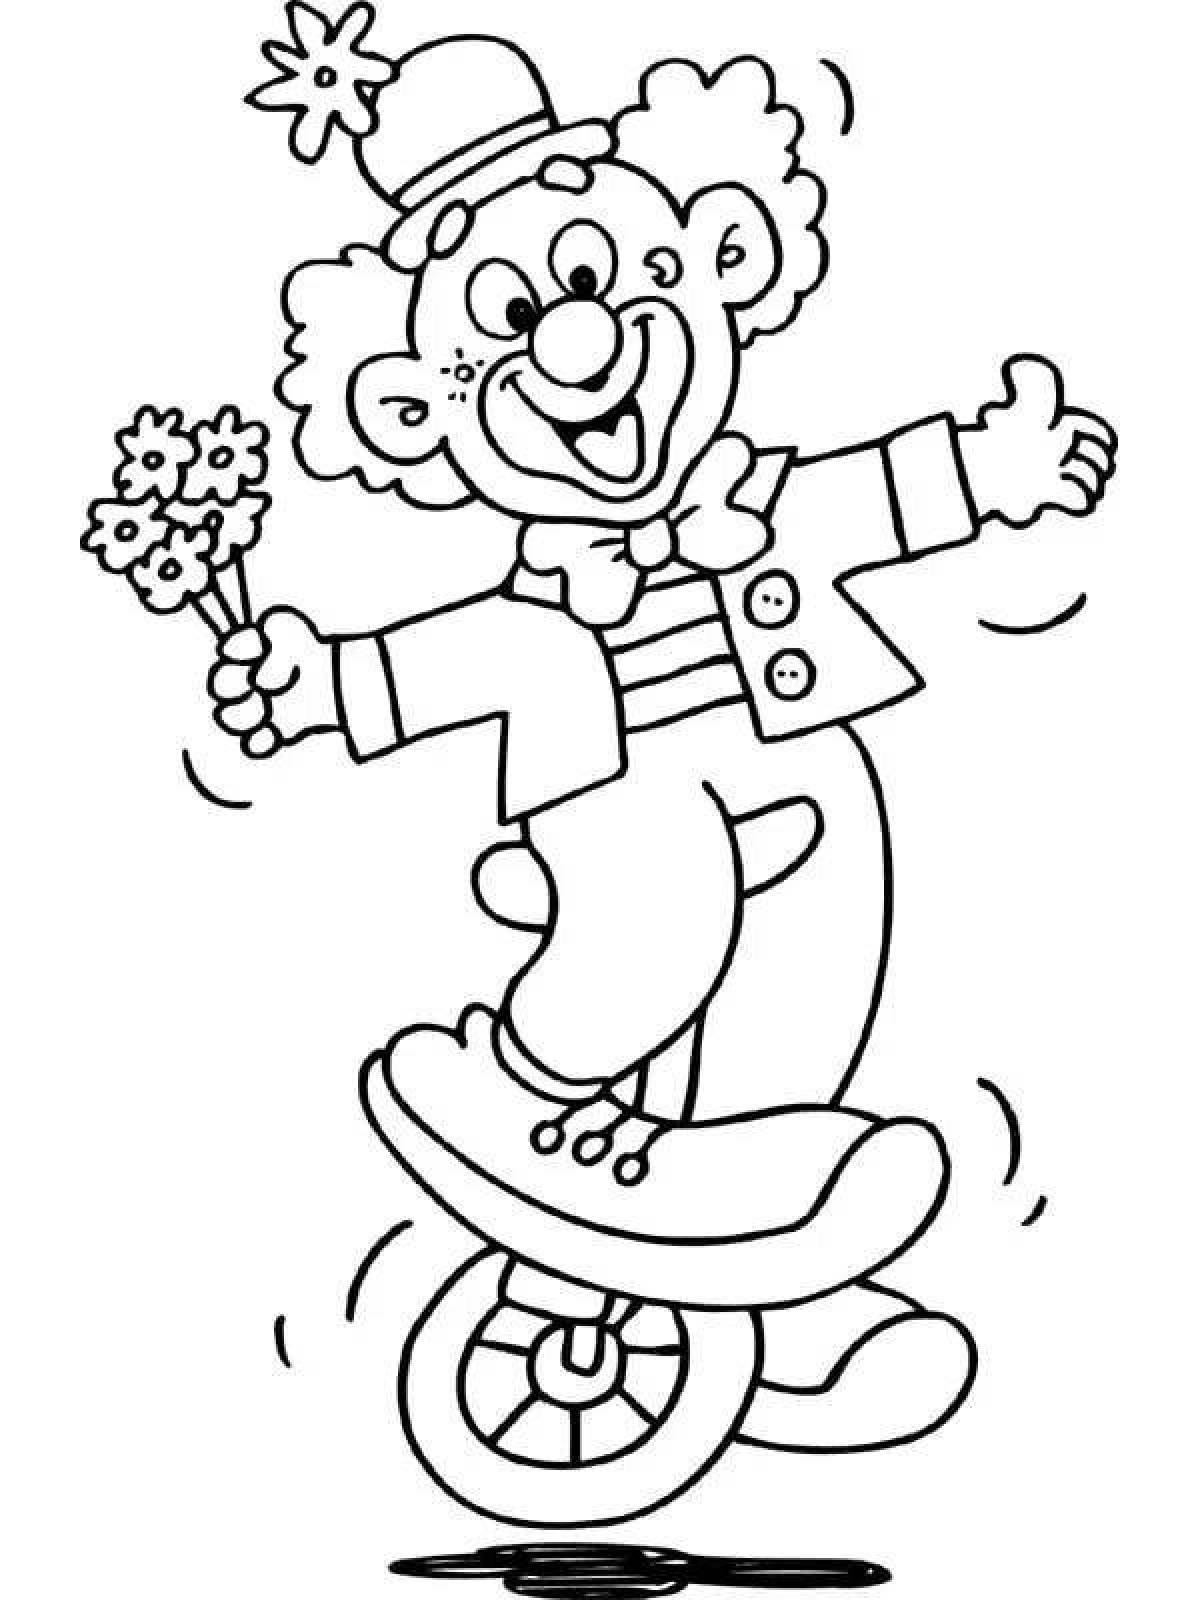 Smiling funny clown coloring book